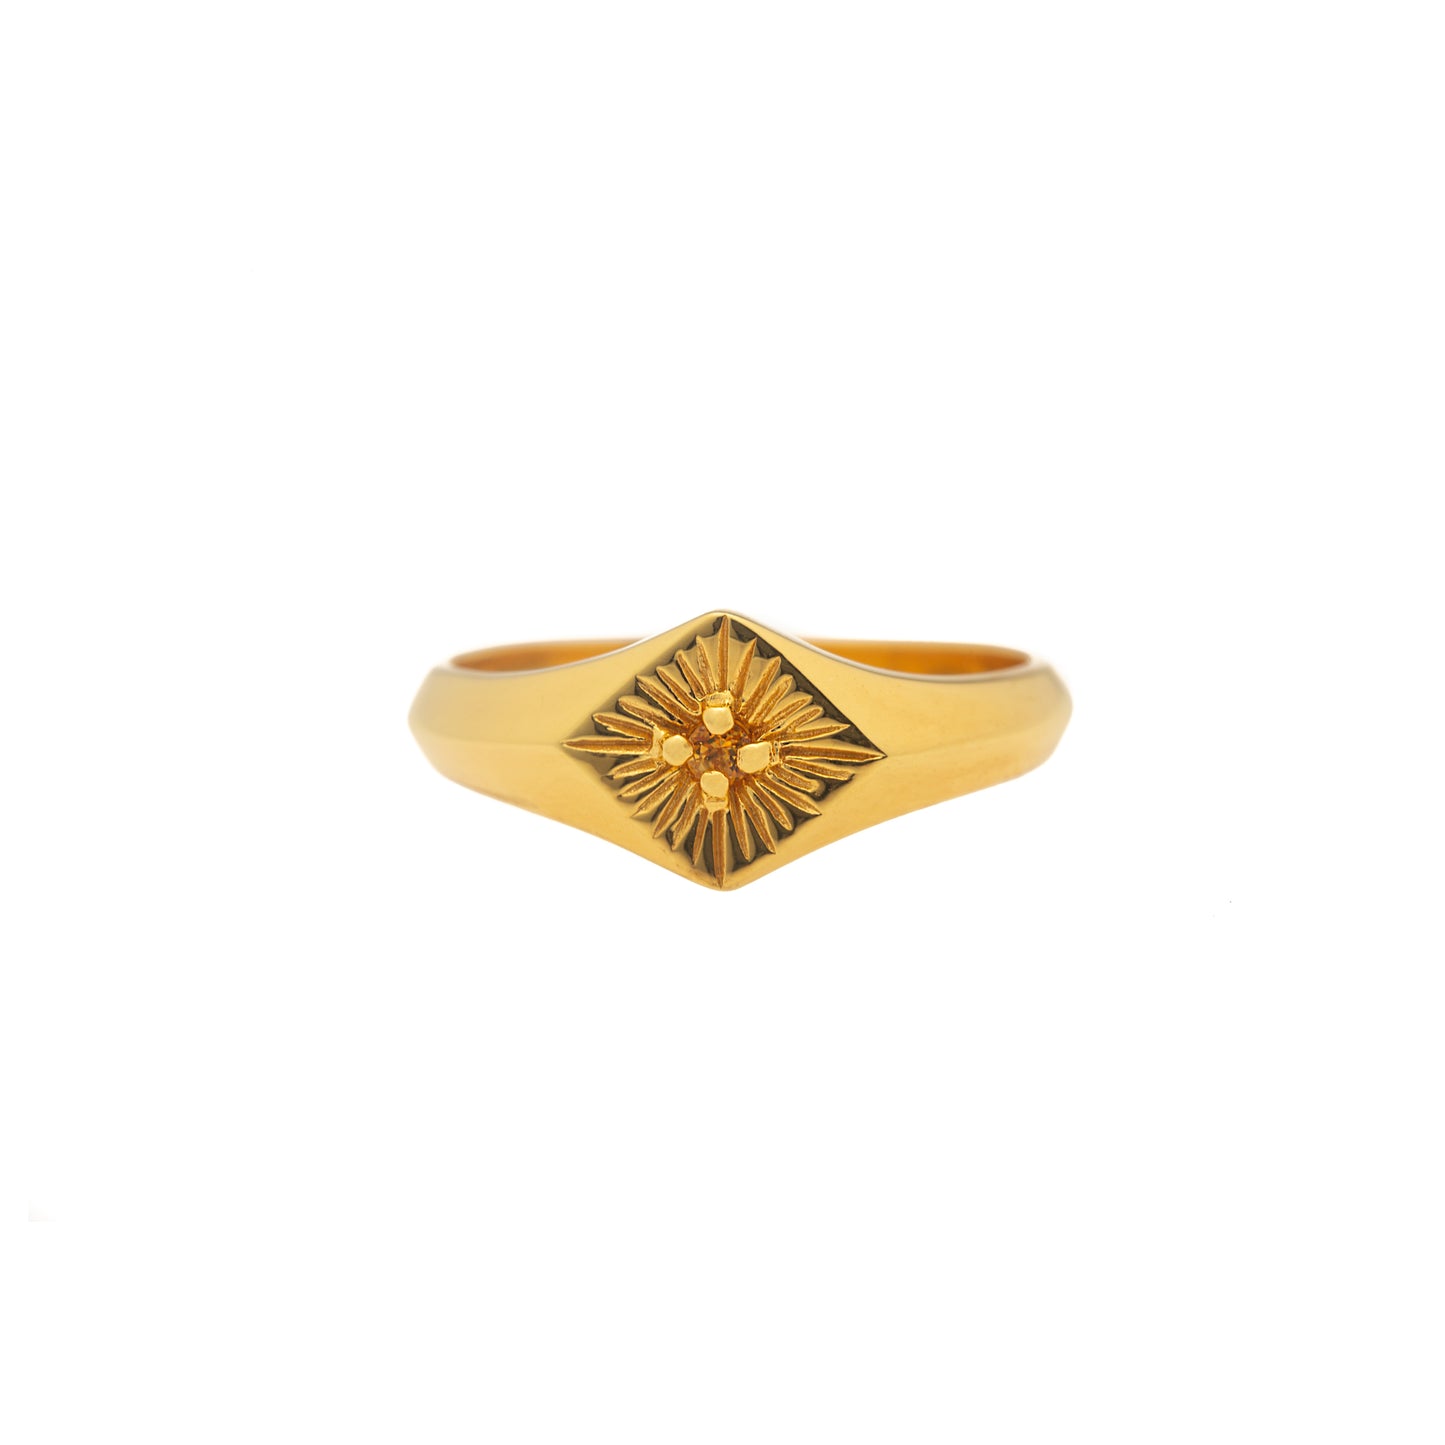 Hunt Of Hounds Sunniva Ring. Gold ring with citrine. Sun. Light. Happiness. Joy.